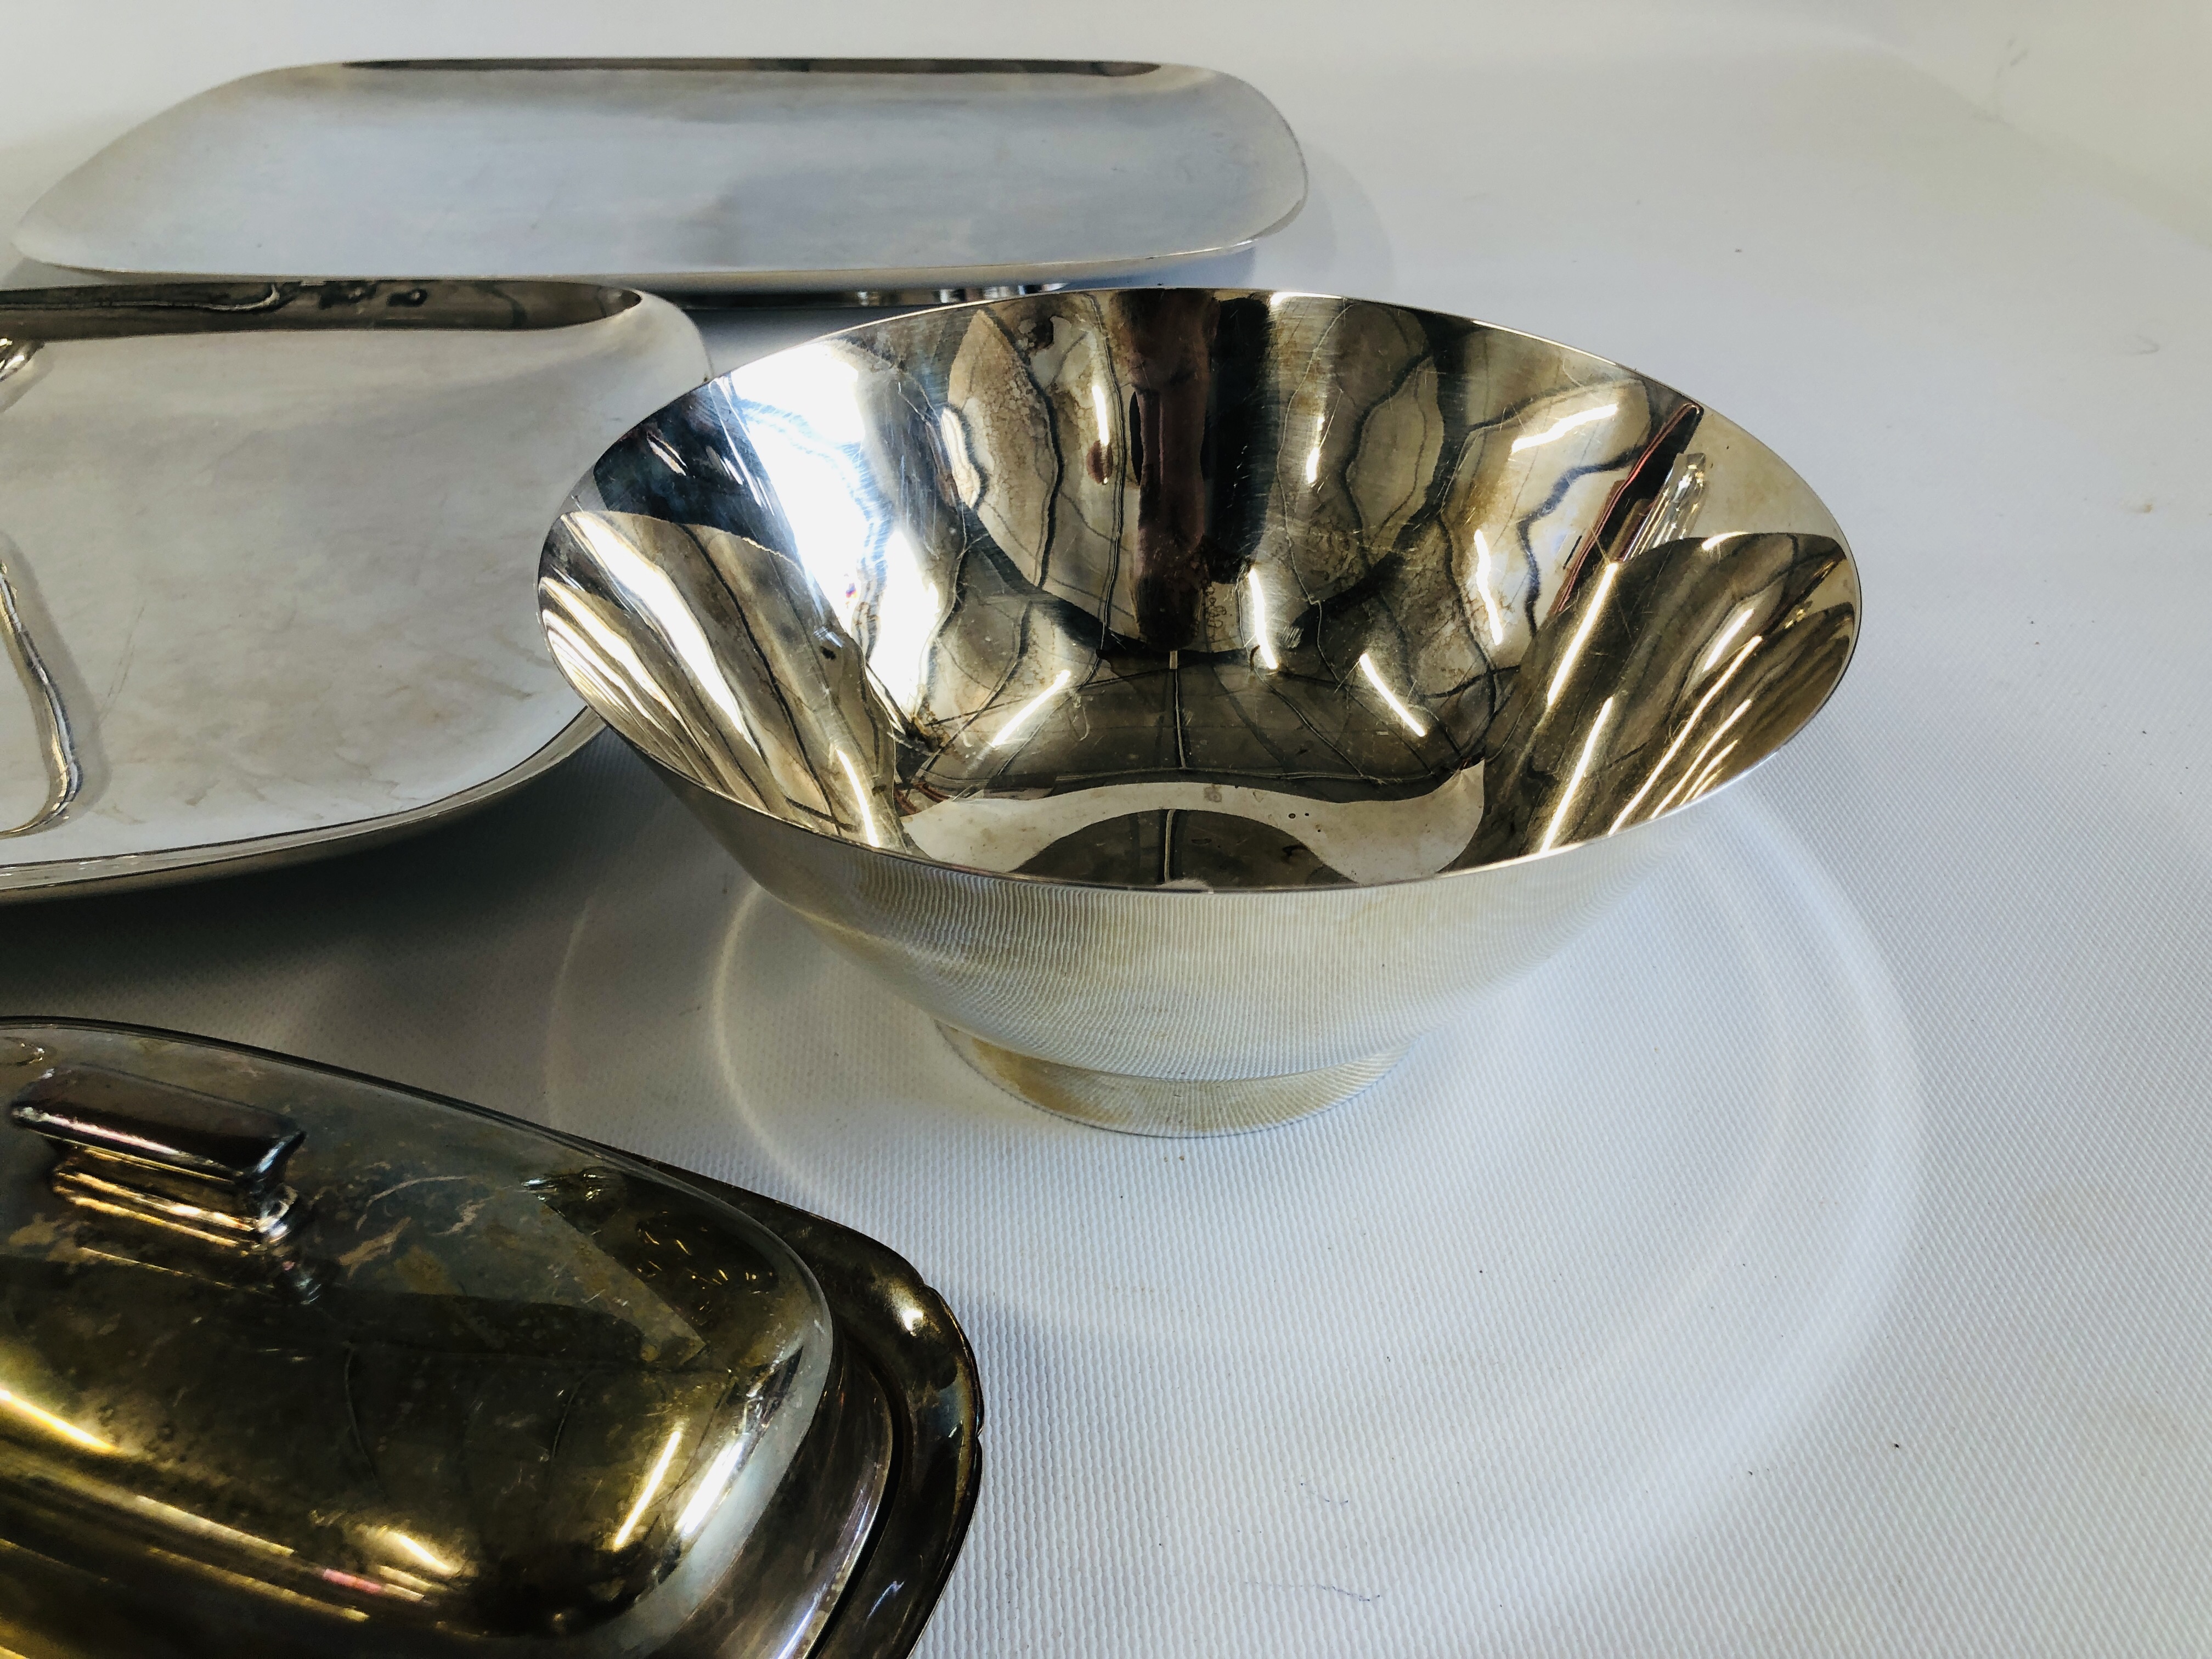 A COLLECTION OF APPROX 11 PIECES OF GOOD QUALITY PLATED WARE MARKED "REED & BARTON" ALONG WITH AN - Image 3 of 12